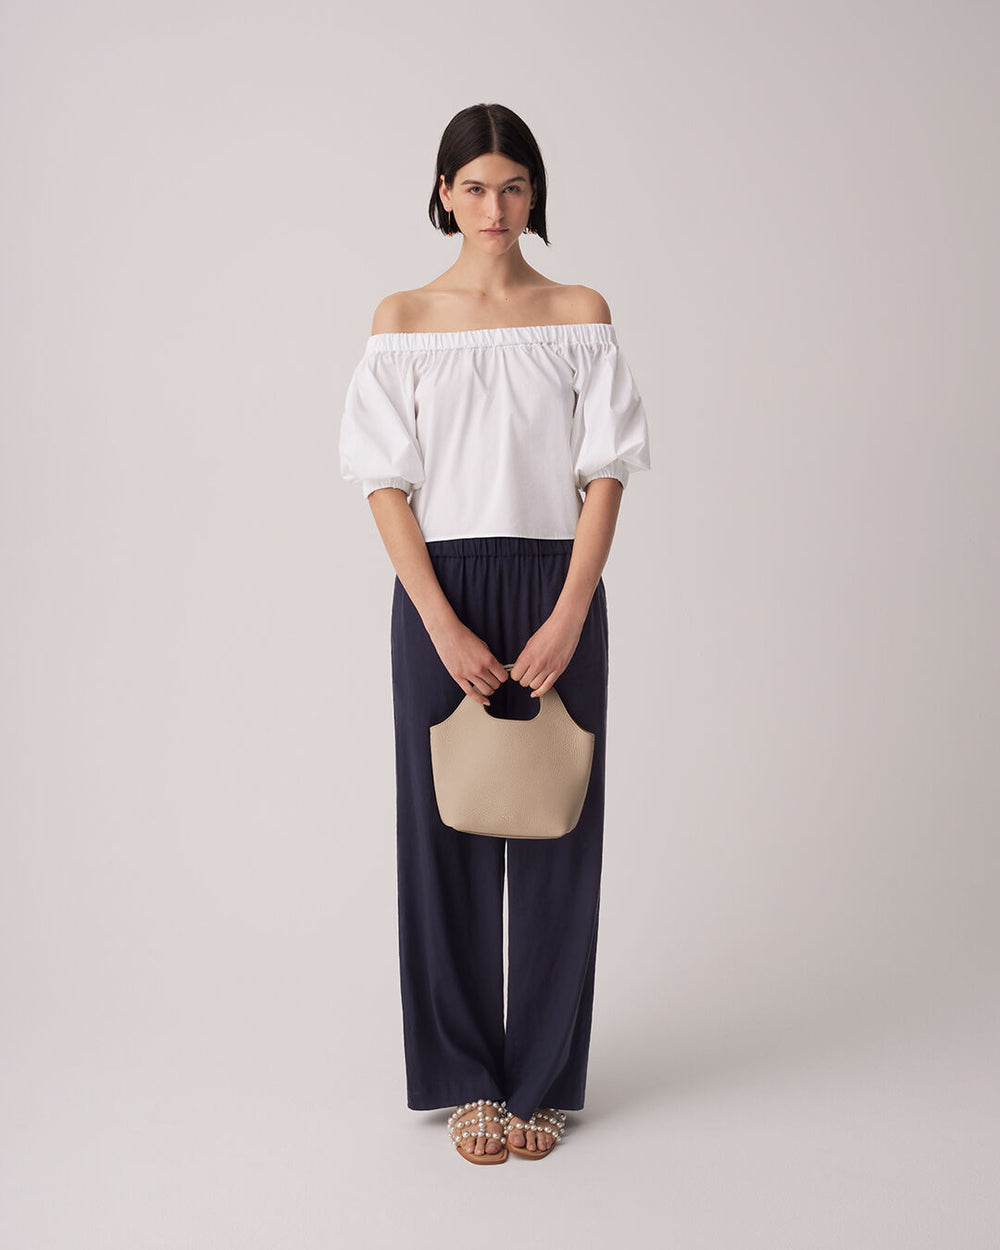 Woman in off-shoulder top and pants holding a purse, standing upright.